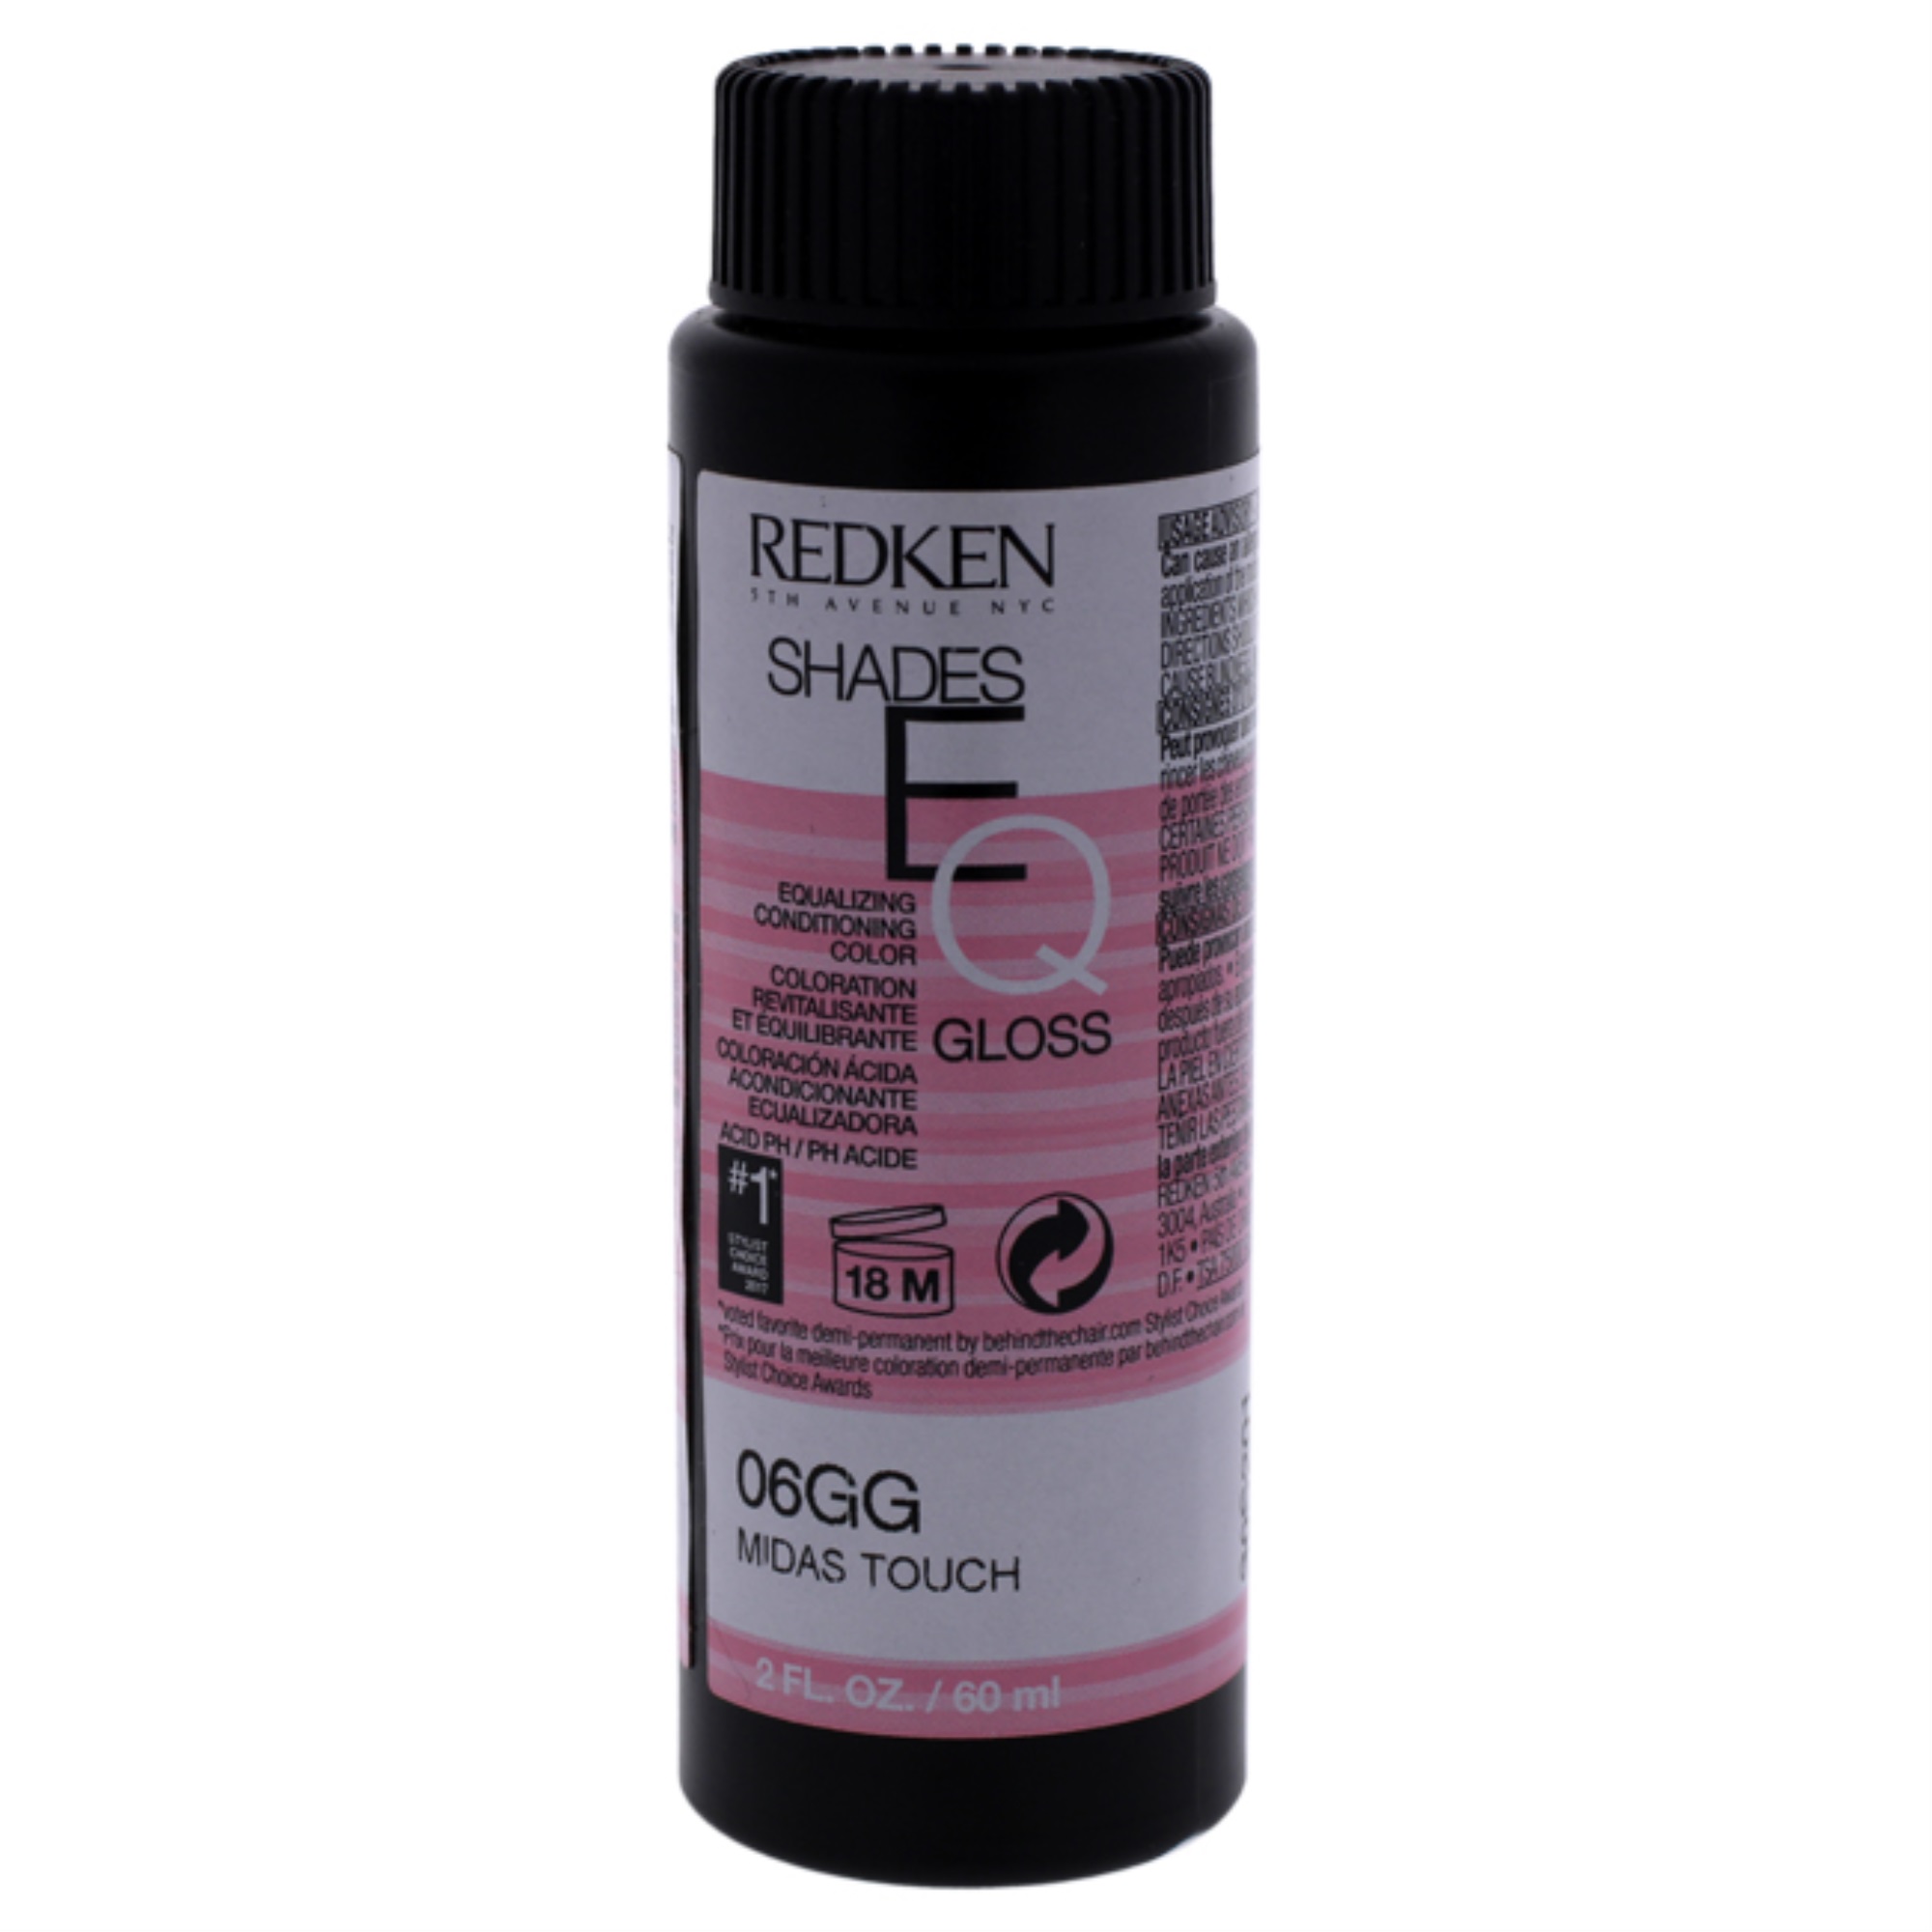 Redken Shades EQ Color Gloss 06GG - Midas Touch by Redken for Unisex - 2 oz Hair Color